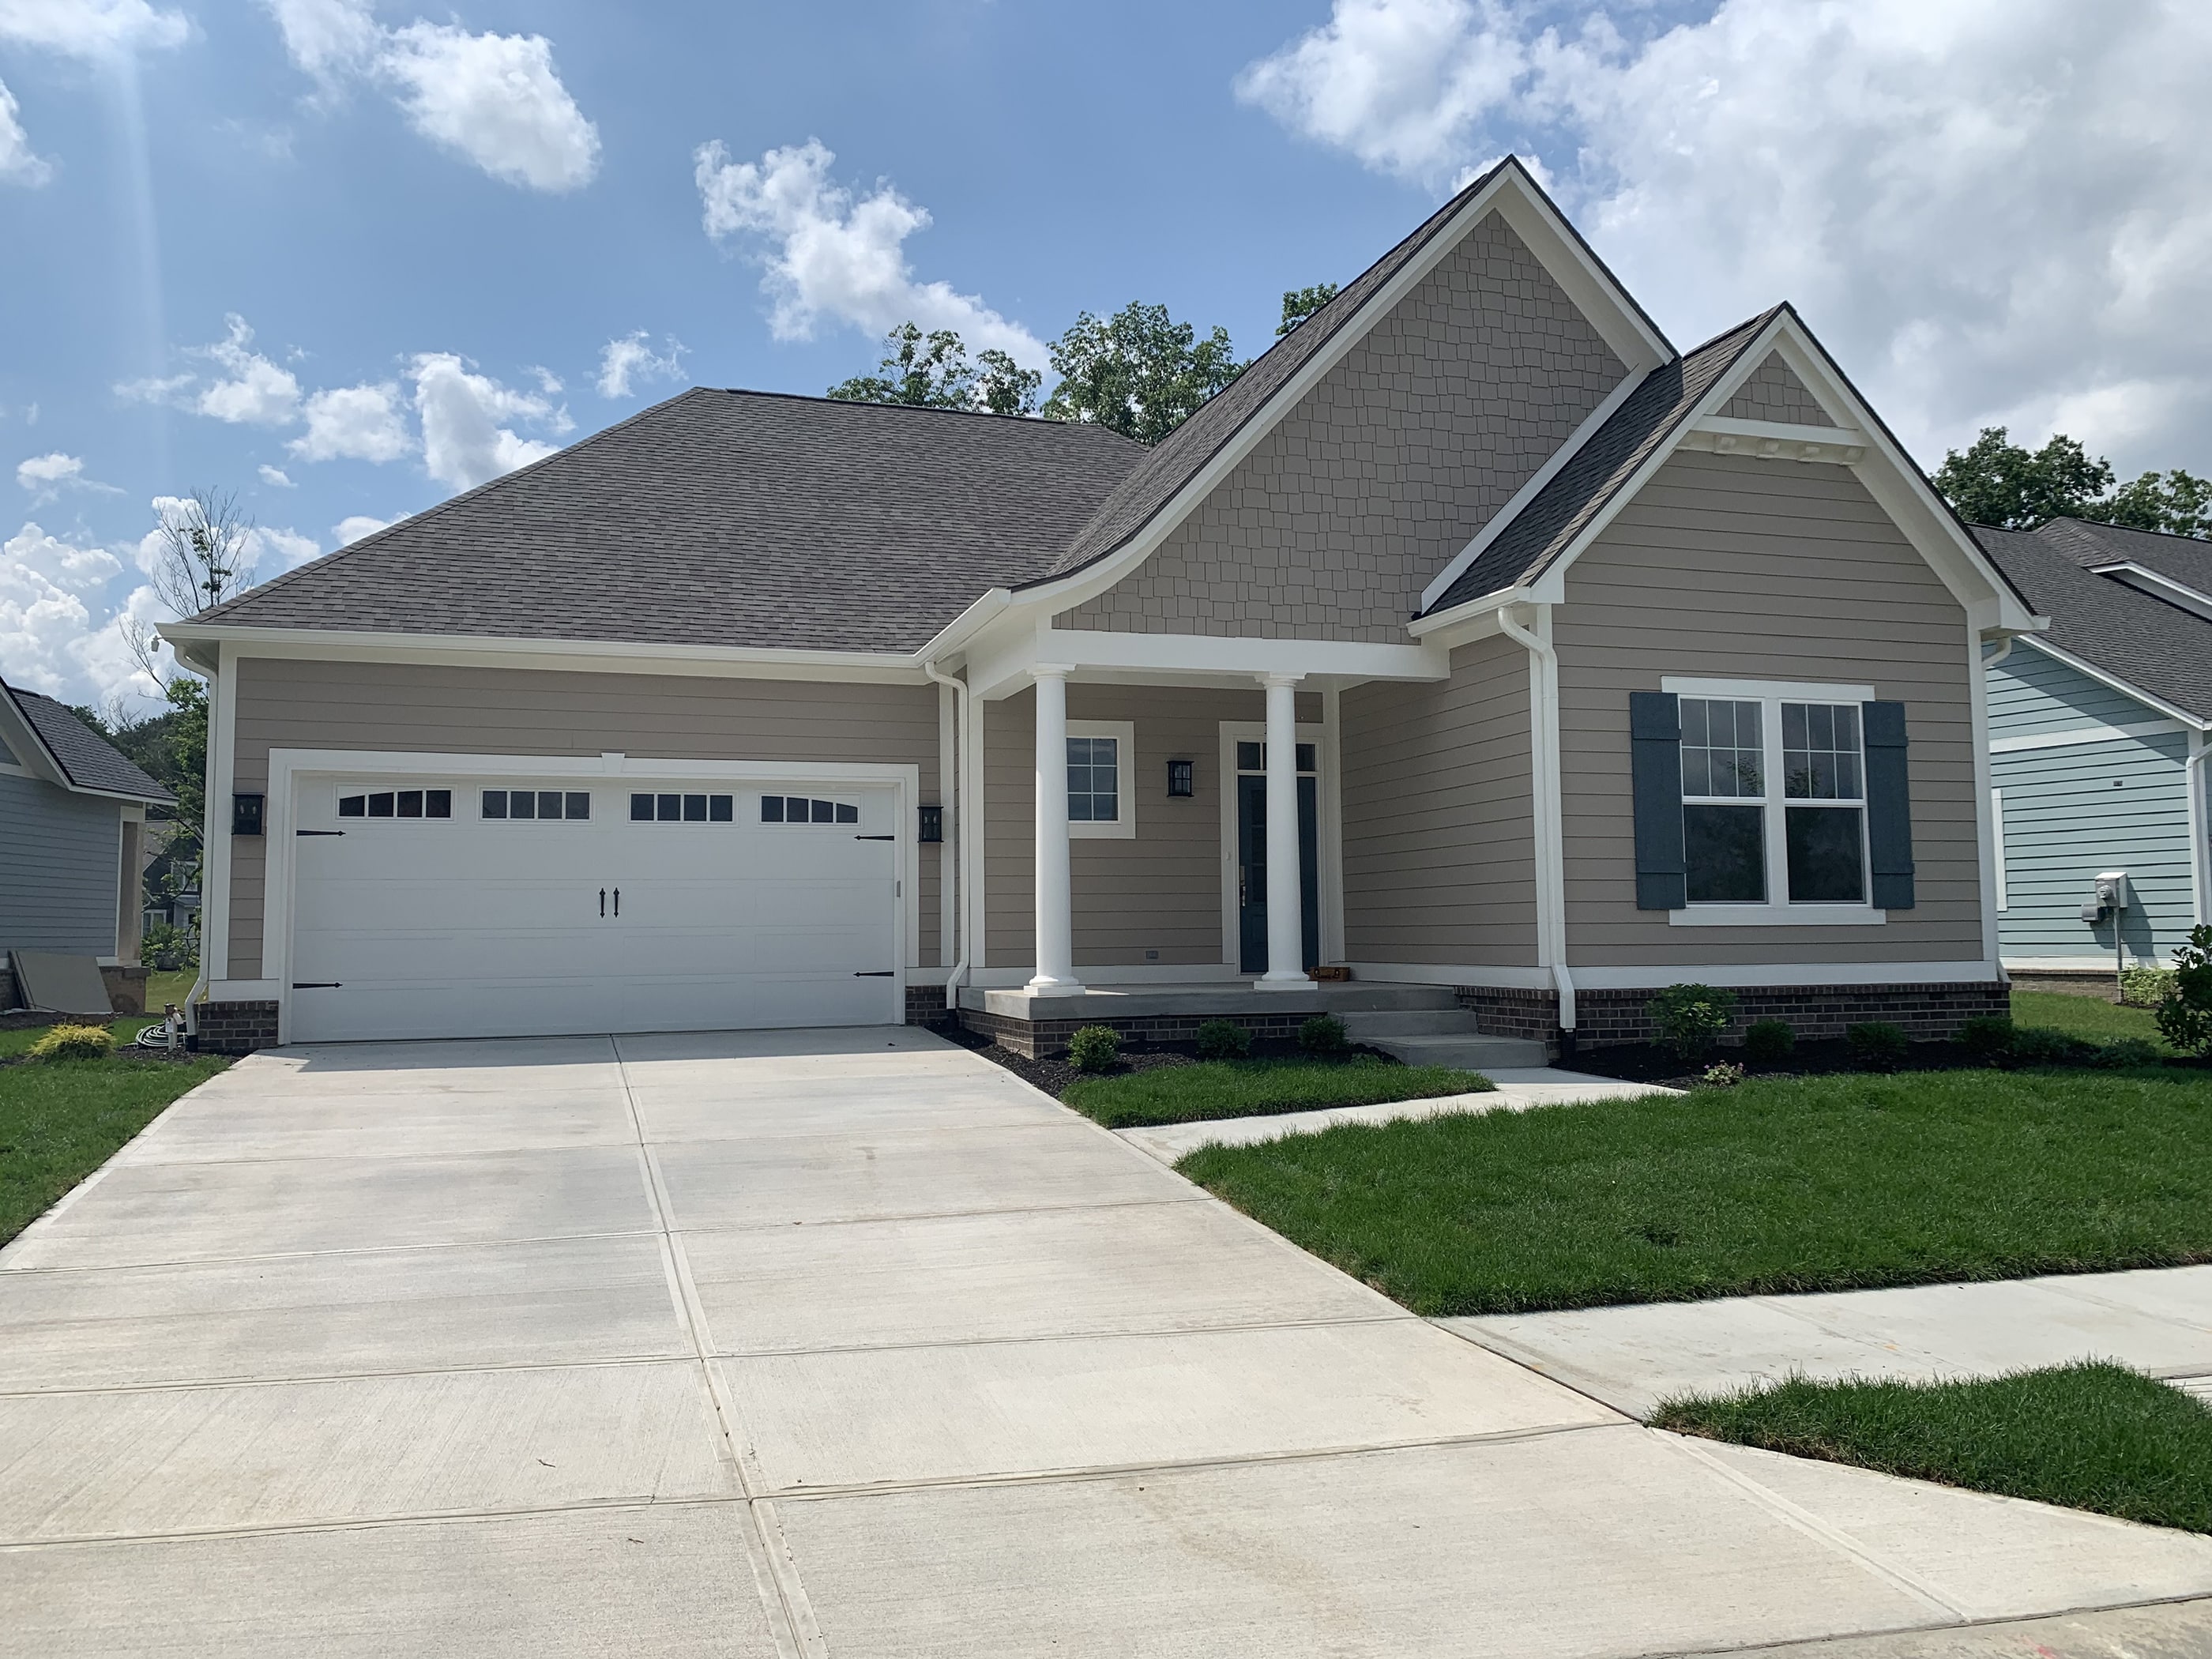 A custom home with two garages and a driveway in Westfield, Indiana.